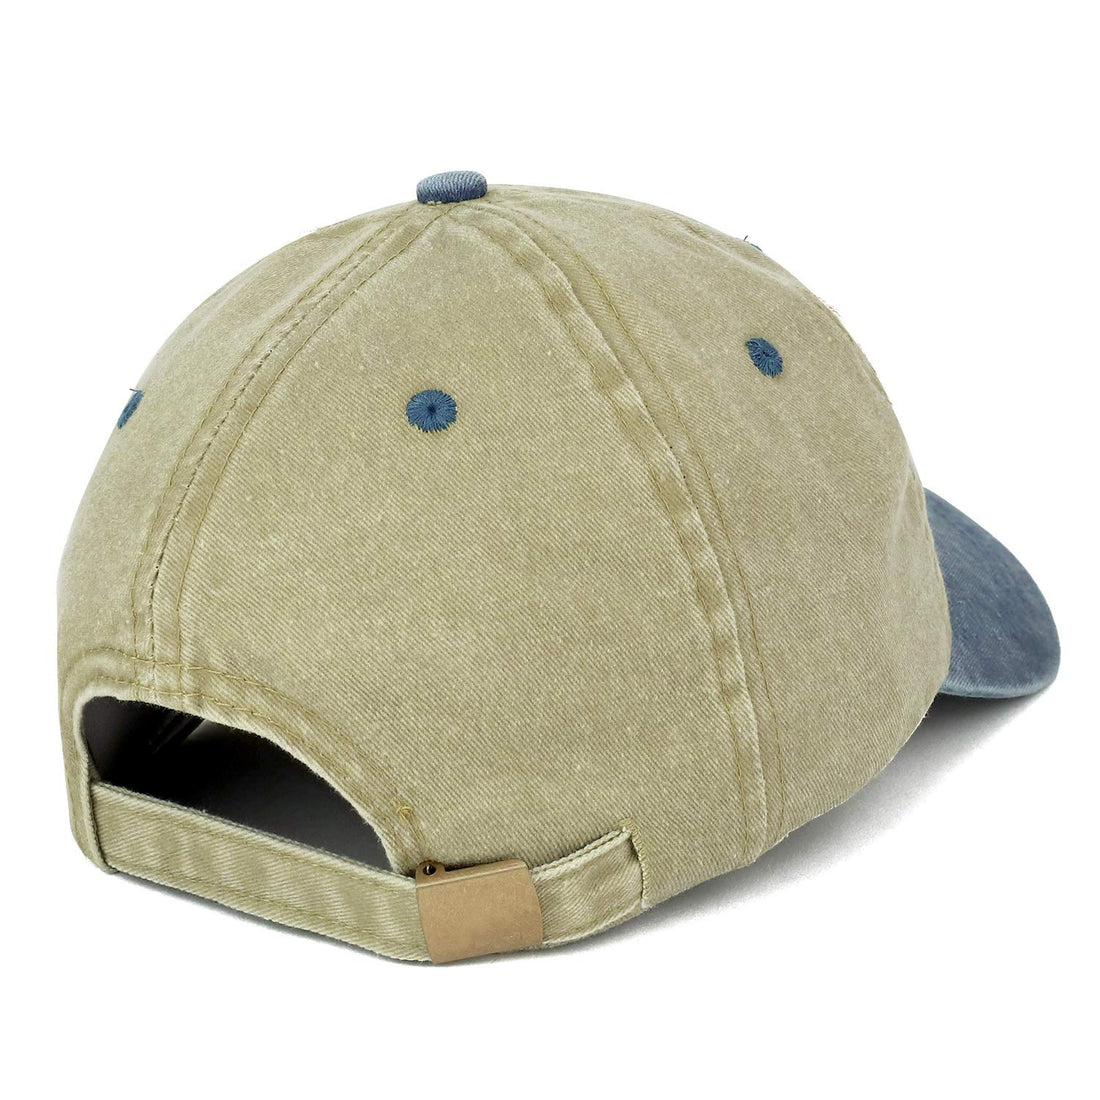 Trendy Apparel Shop Orange Patch Pigment Dyed Washed Two Tone Baseball Cap